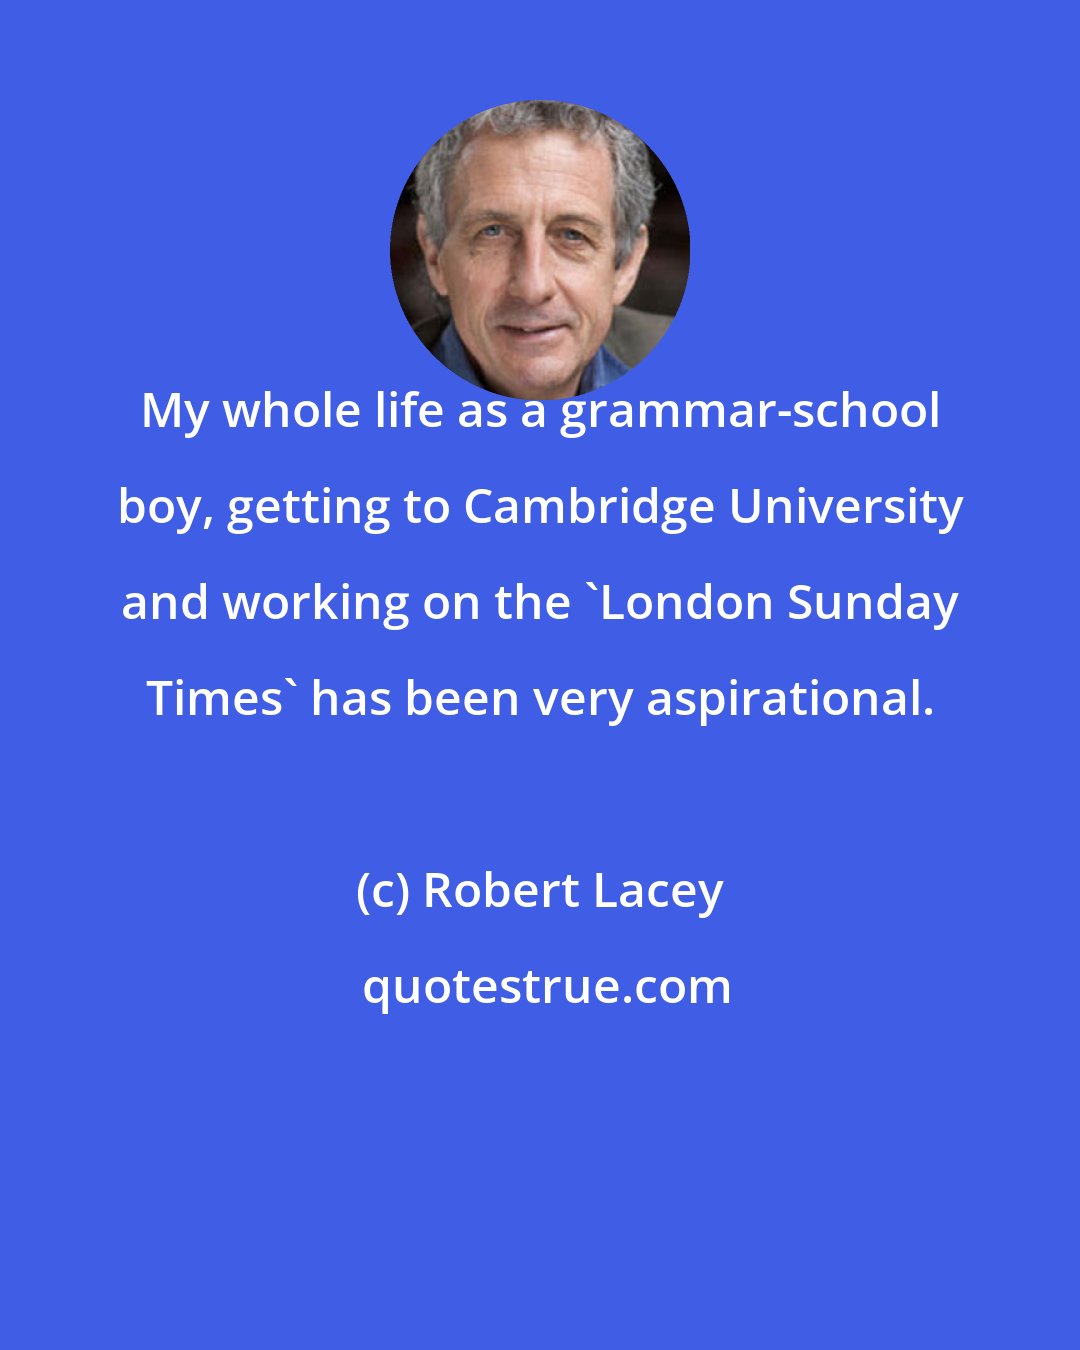 Robert Lacey: My whole life as a grammar-school boy, getting to Cambridge University and working on the 'London Sunday Times' has been very aspirational.